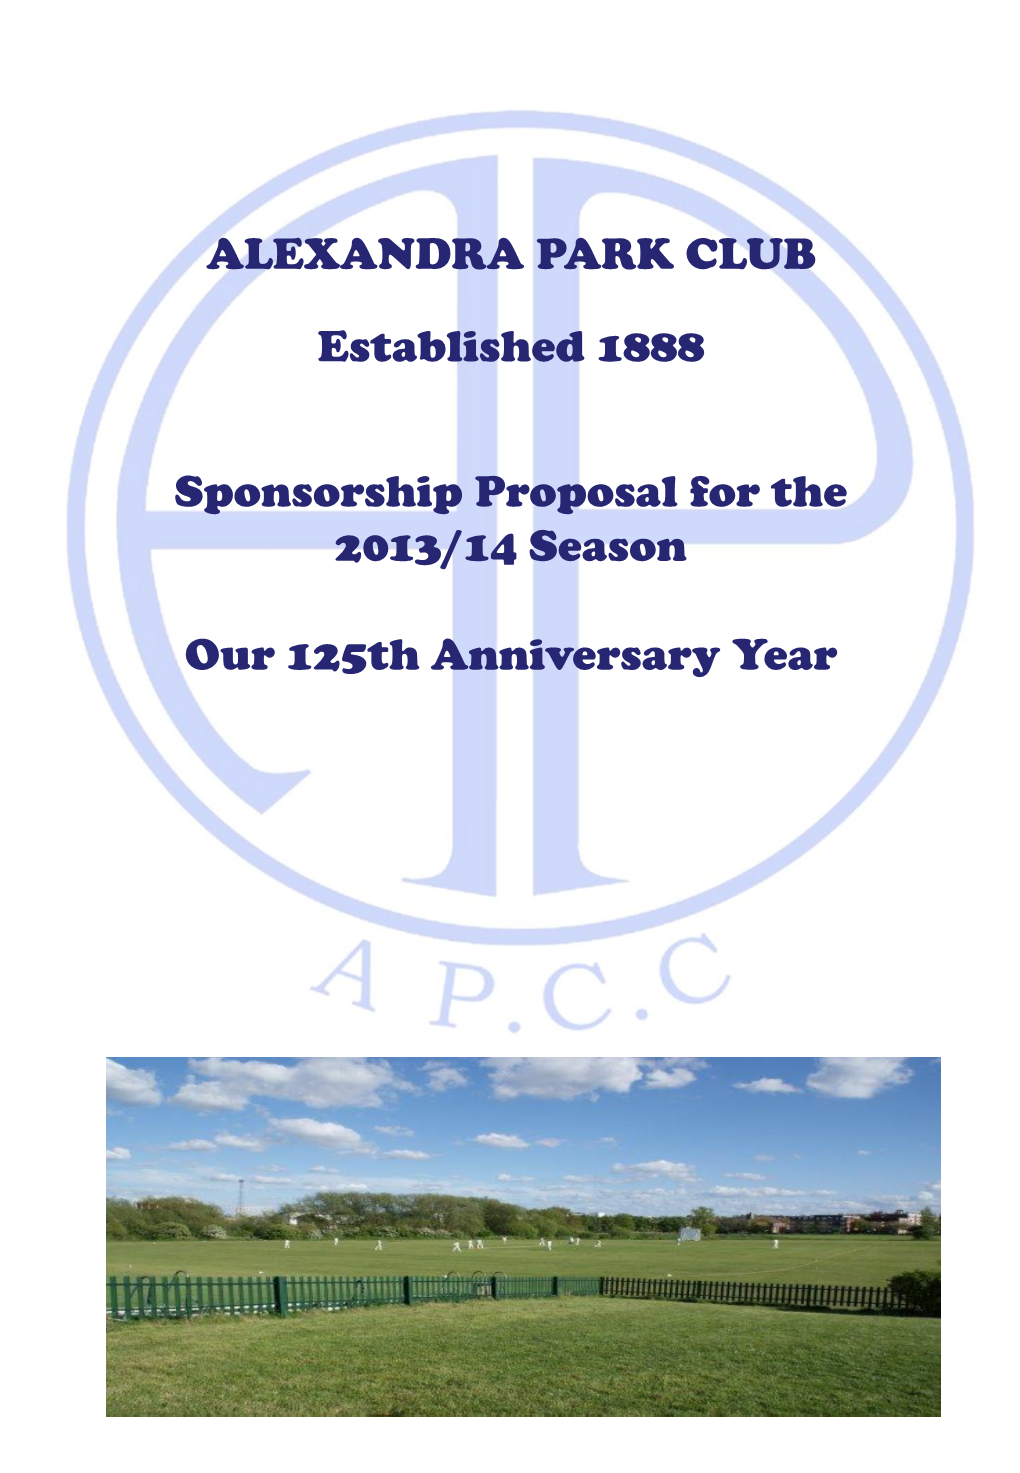 ALEXANDRA PARK CLUB Established 1888 Sponsorship Proposal for the 2013/14 Season Our 125Th Anniversary Year